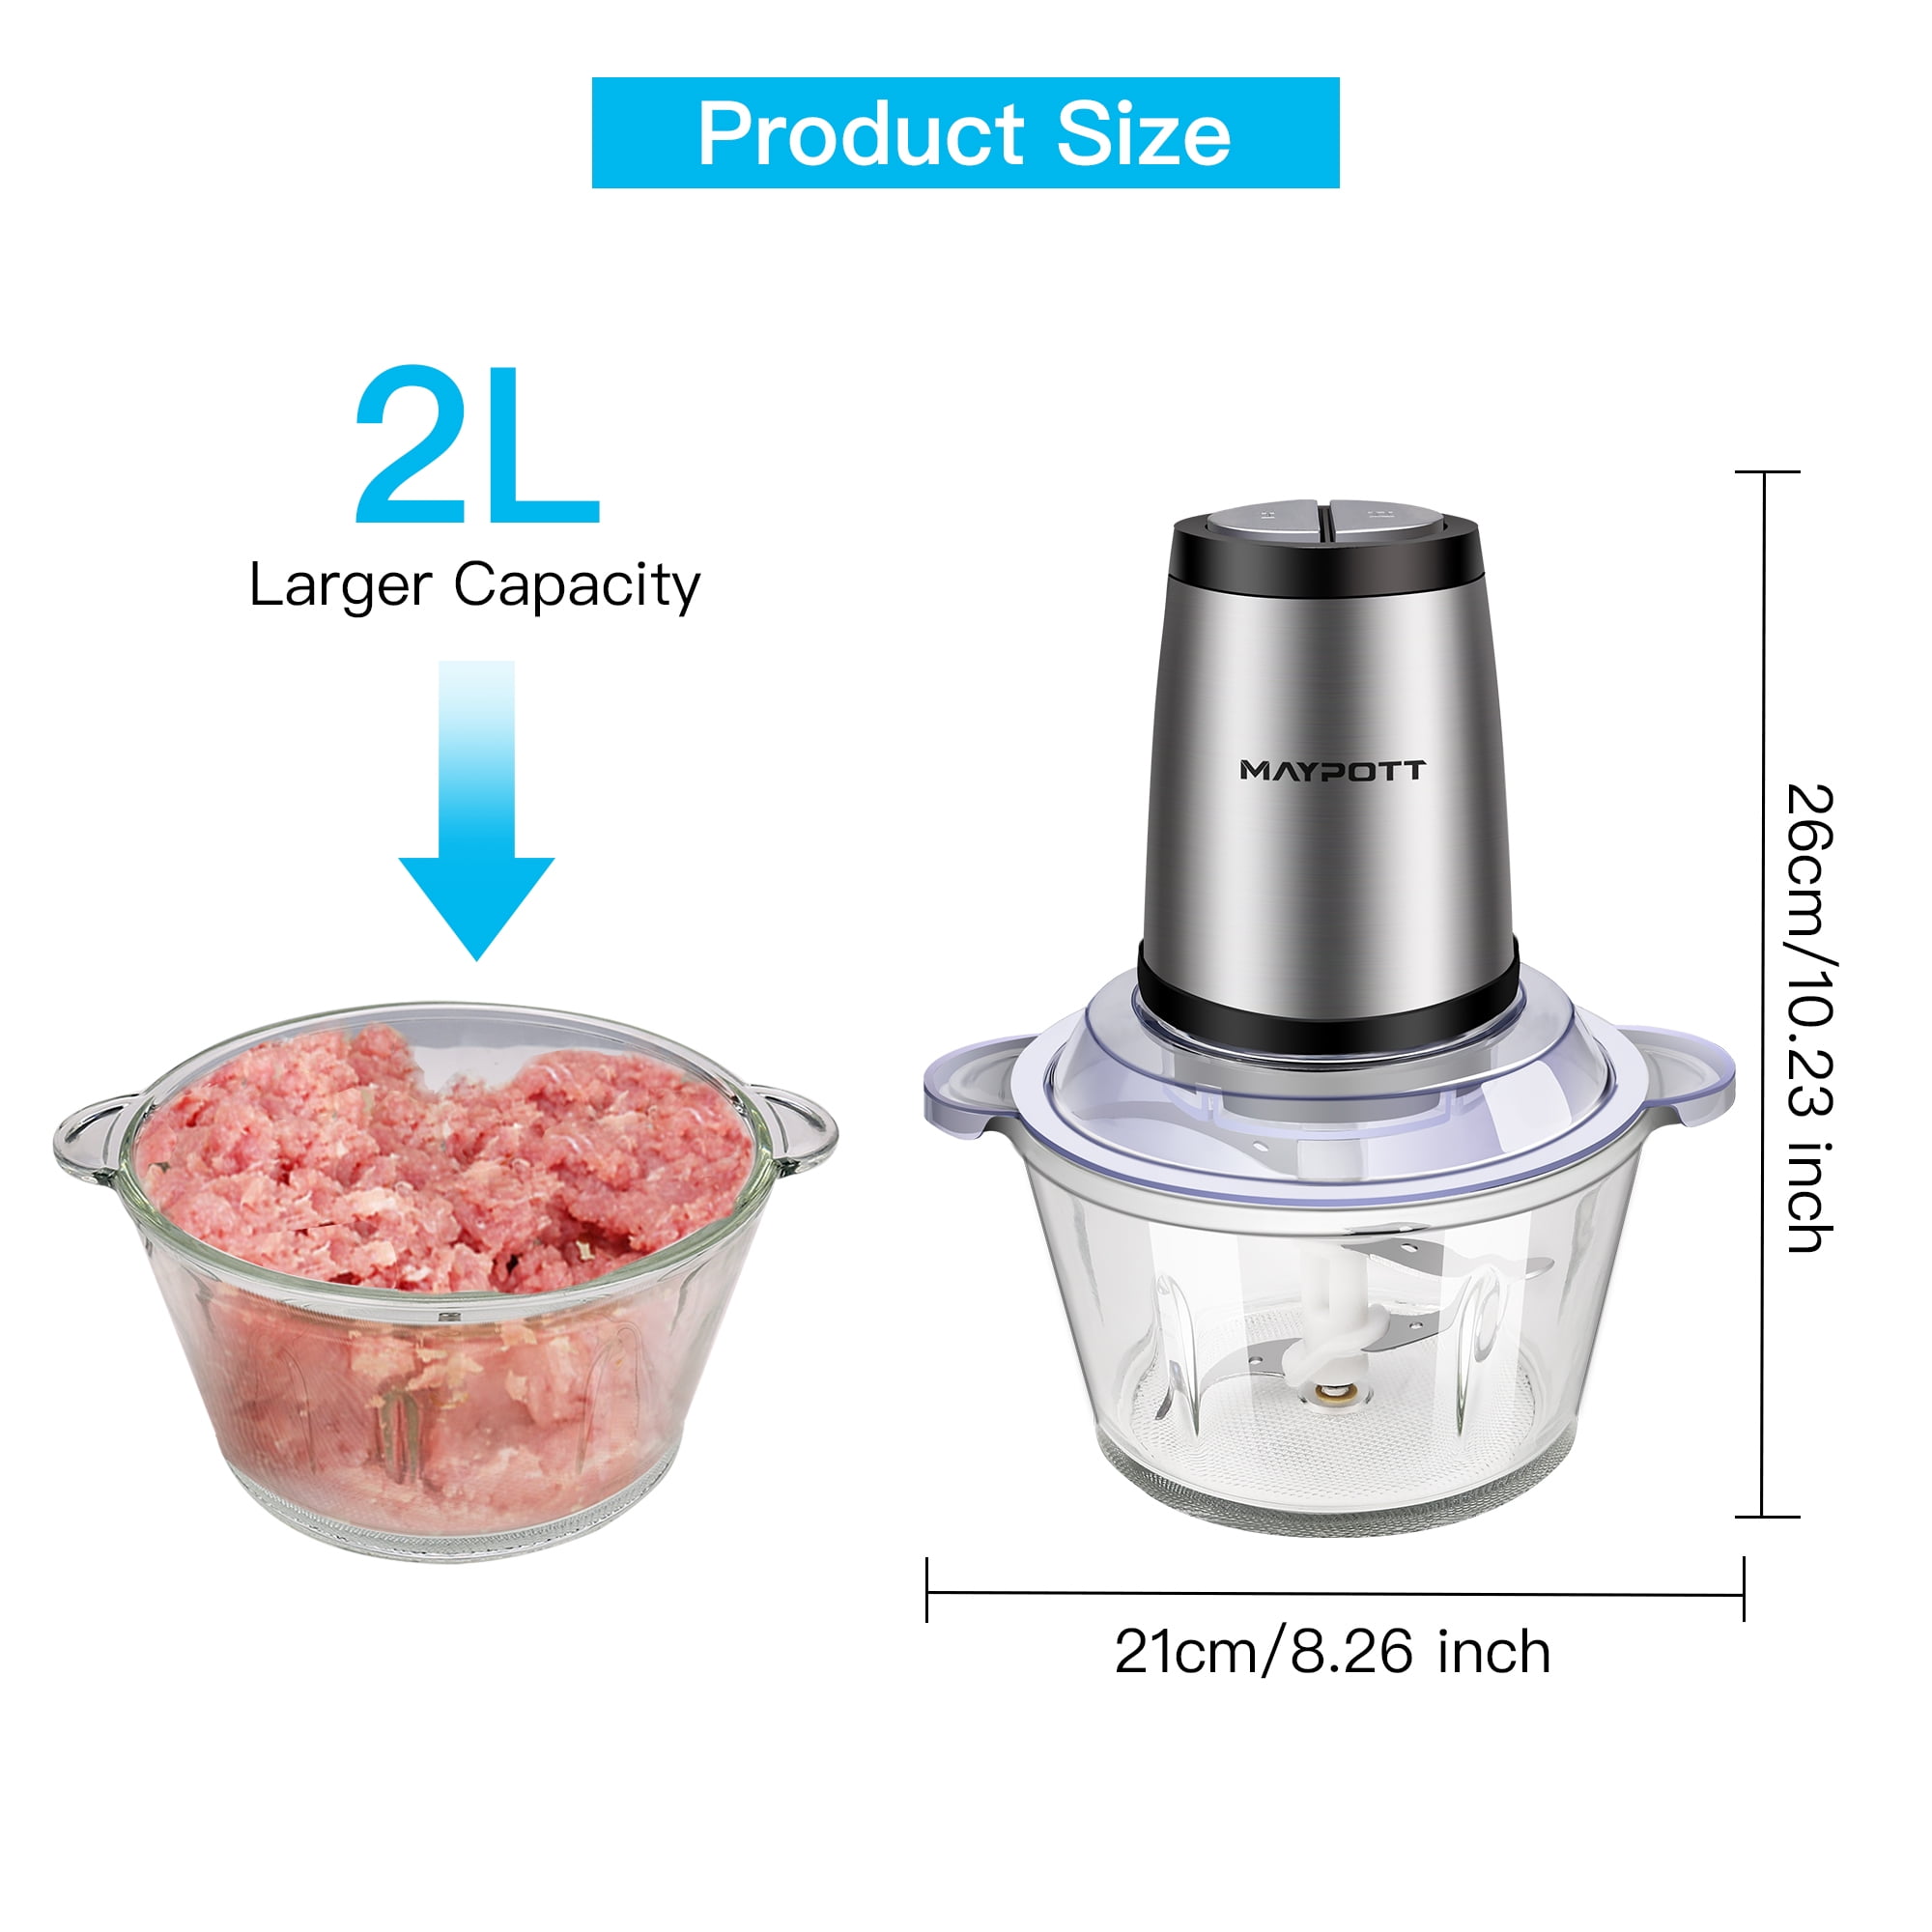  AOSION Electric Food Processor,8 Cup food Chopper,Vegetable  Chopper & Meat grinder 350W with 2L Glass Bowl Grinder with 2 Speed for  Baby Food/Meat/Fruits/Nuts.: Home & Kitchen